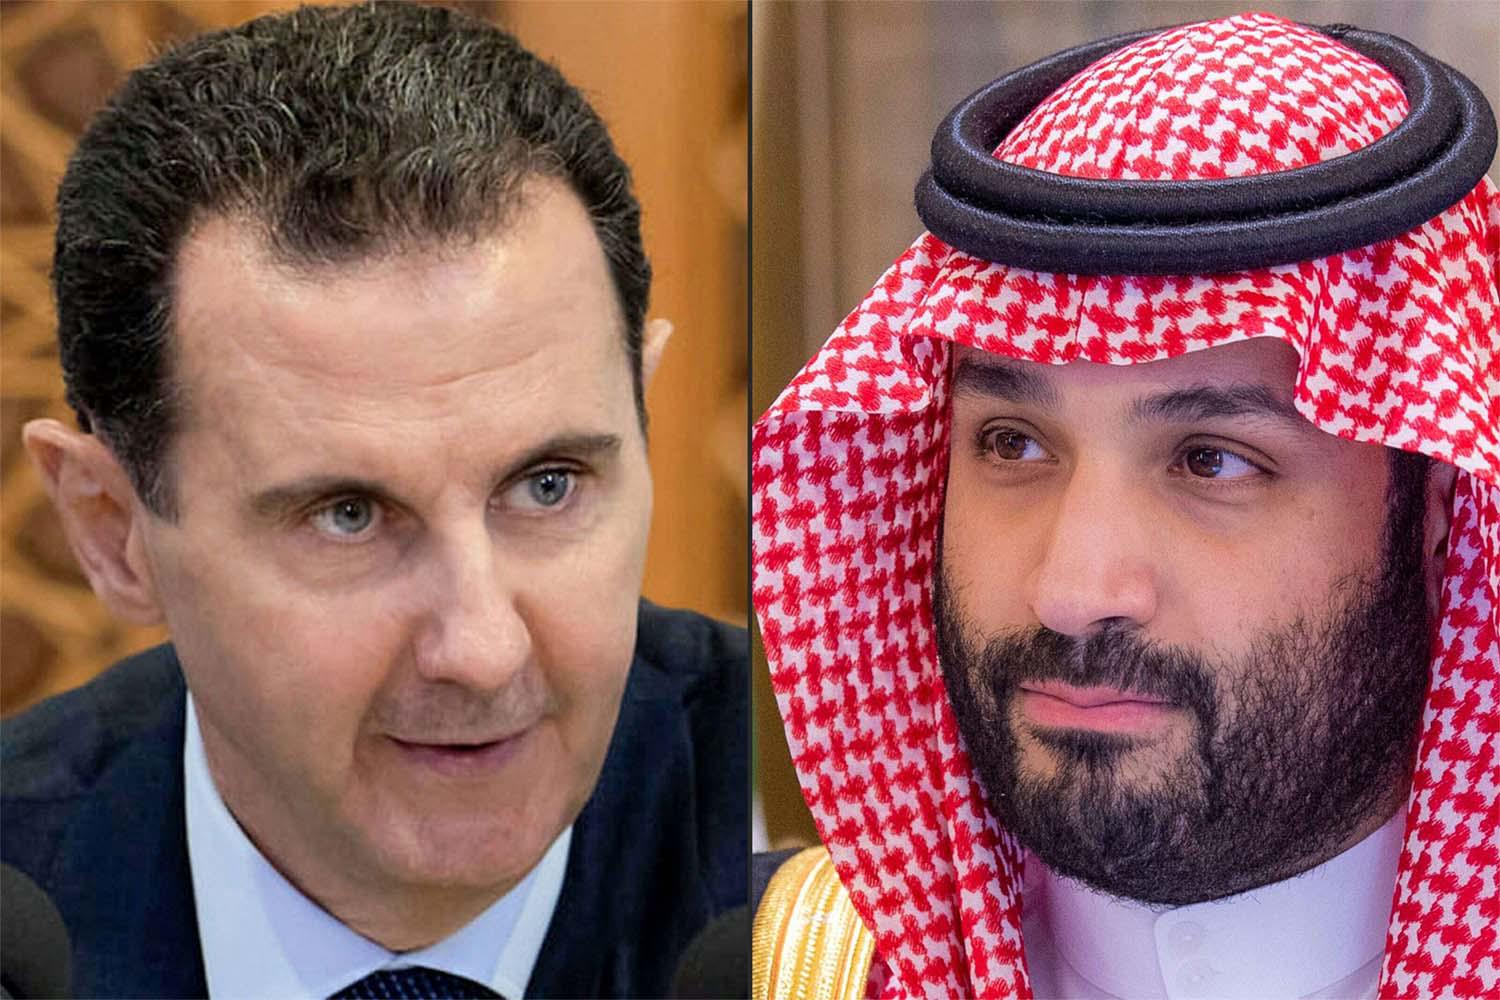 The re-establishment of ties between Riyadh and Damascus would mark the most significant development yet in moves by Arab states to normalize ties with Assad